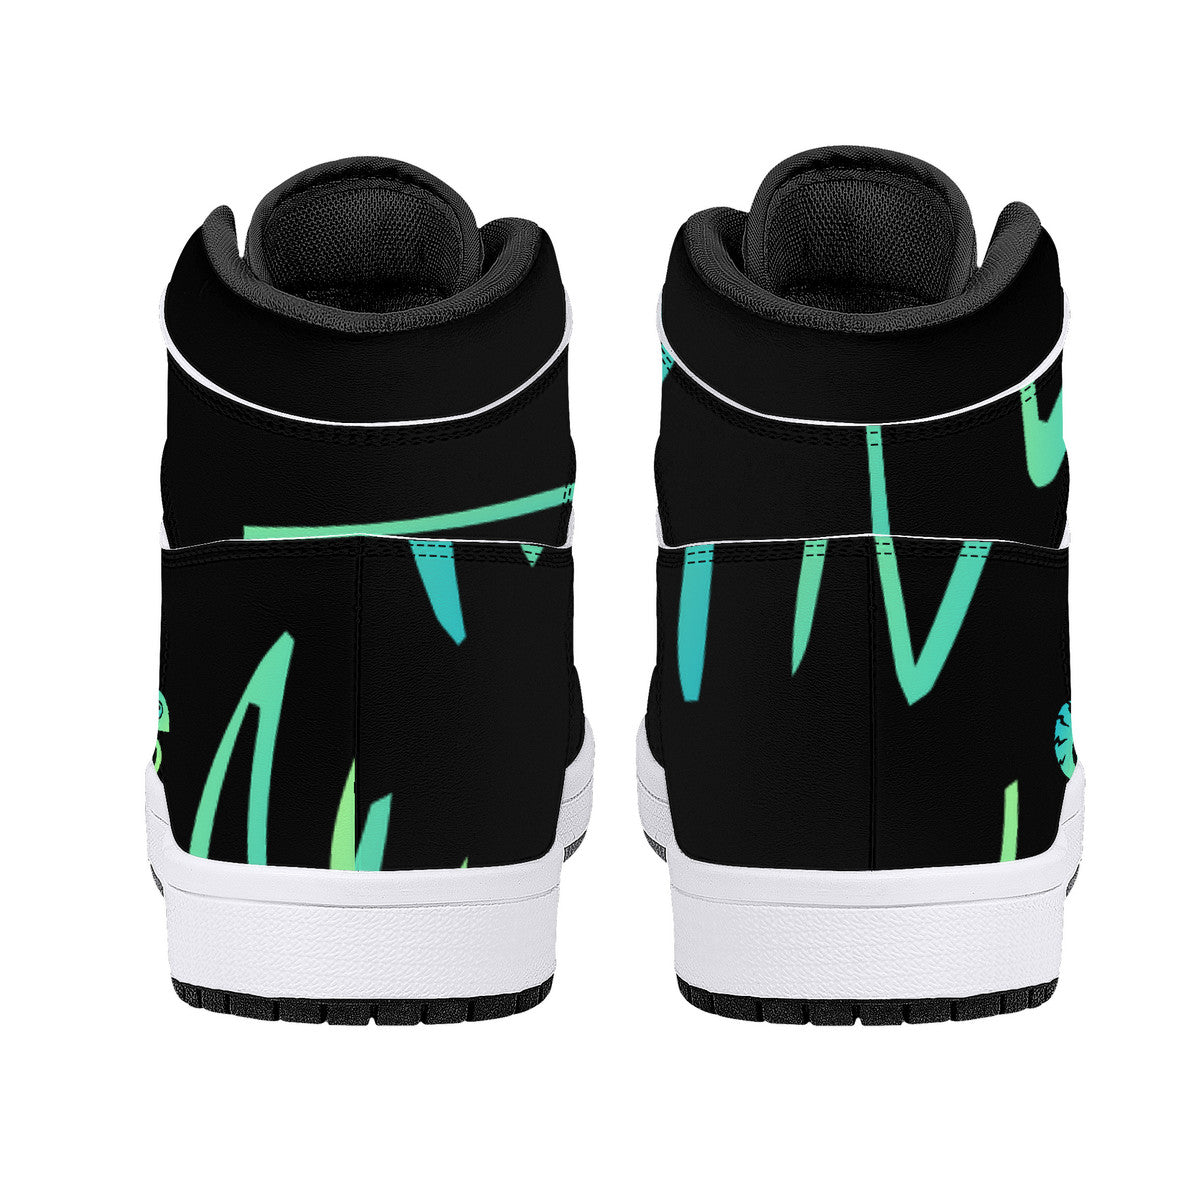 Flex Power | Customized Business Shoes V3 Sneakers